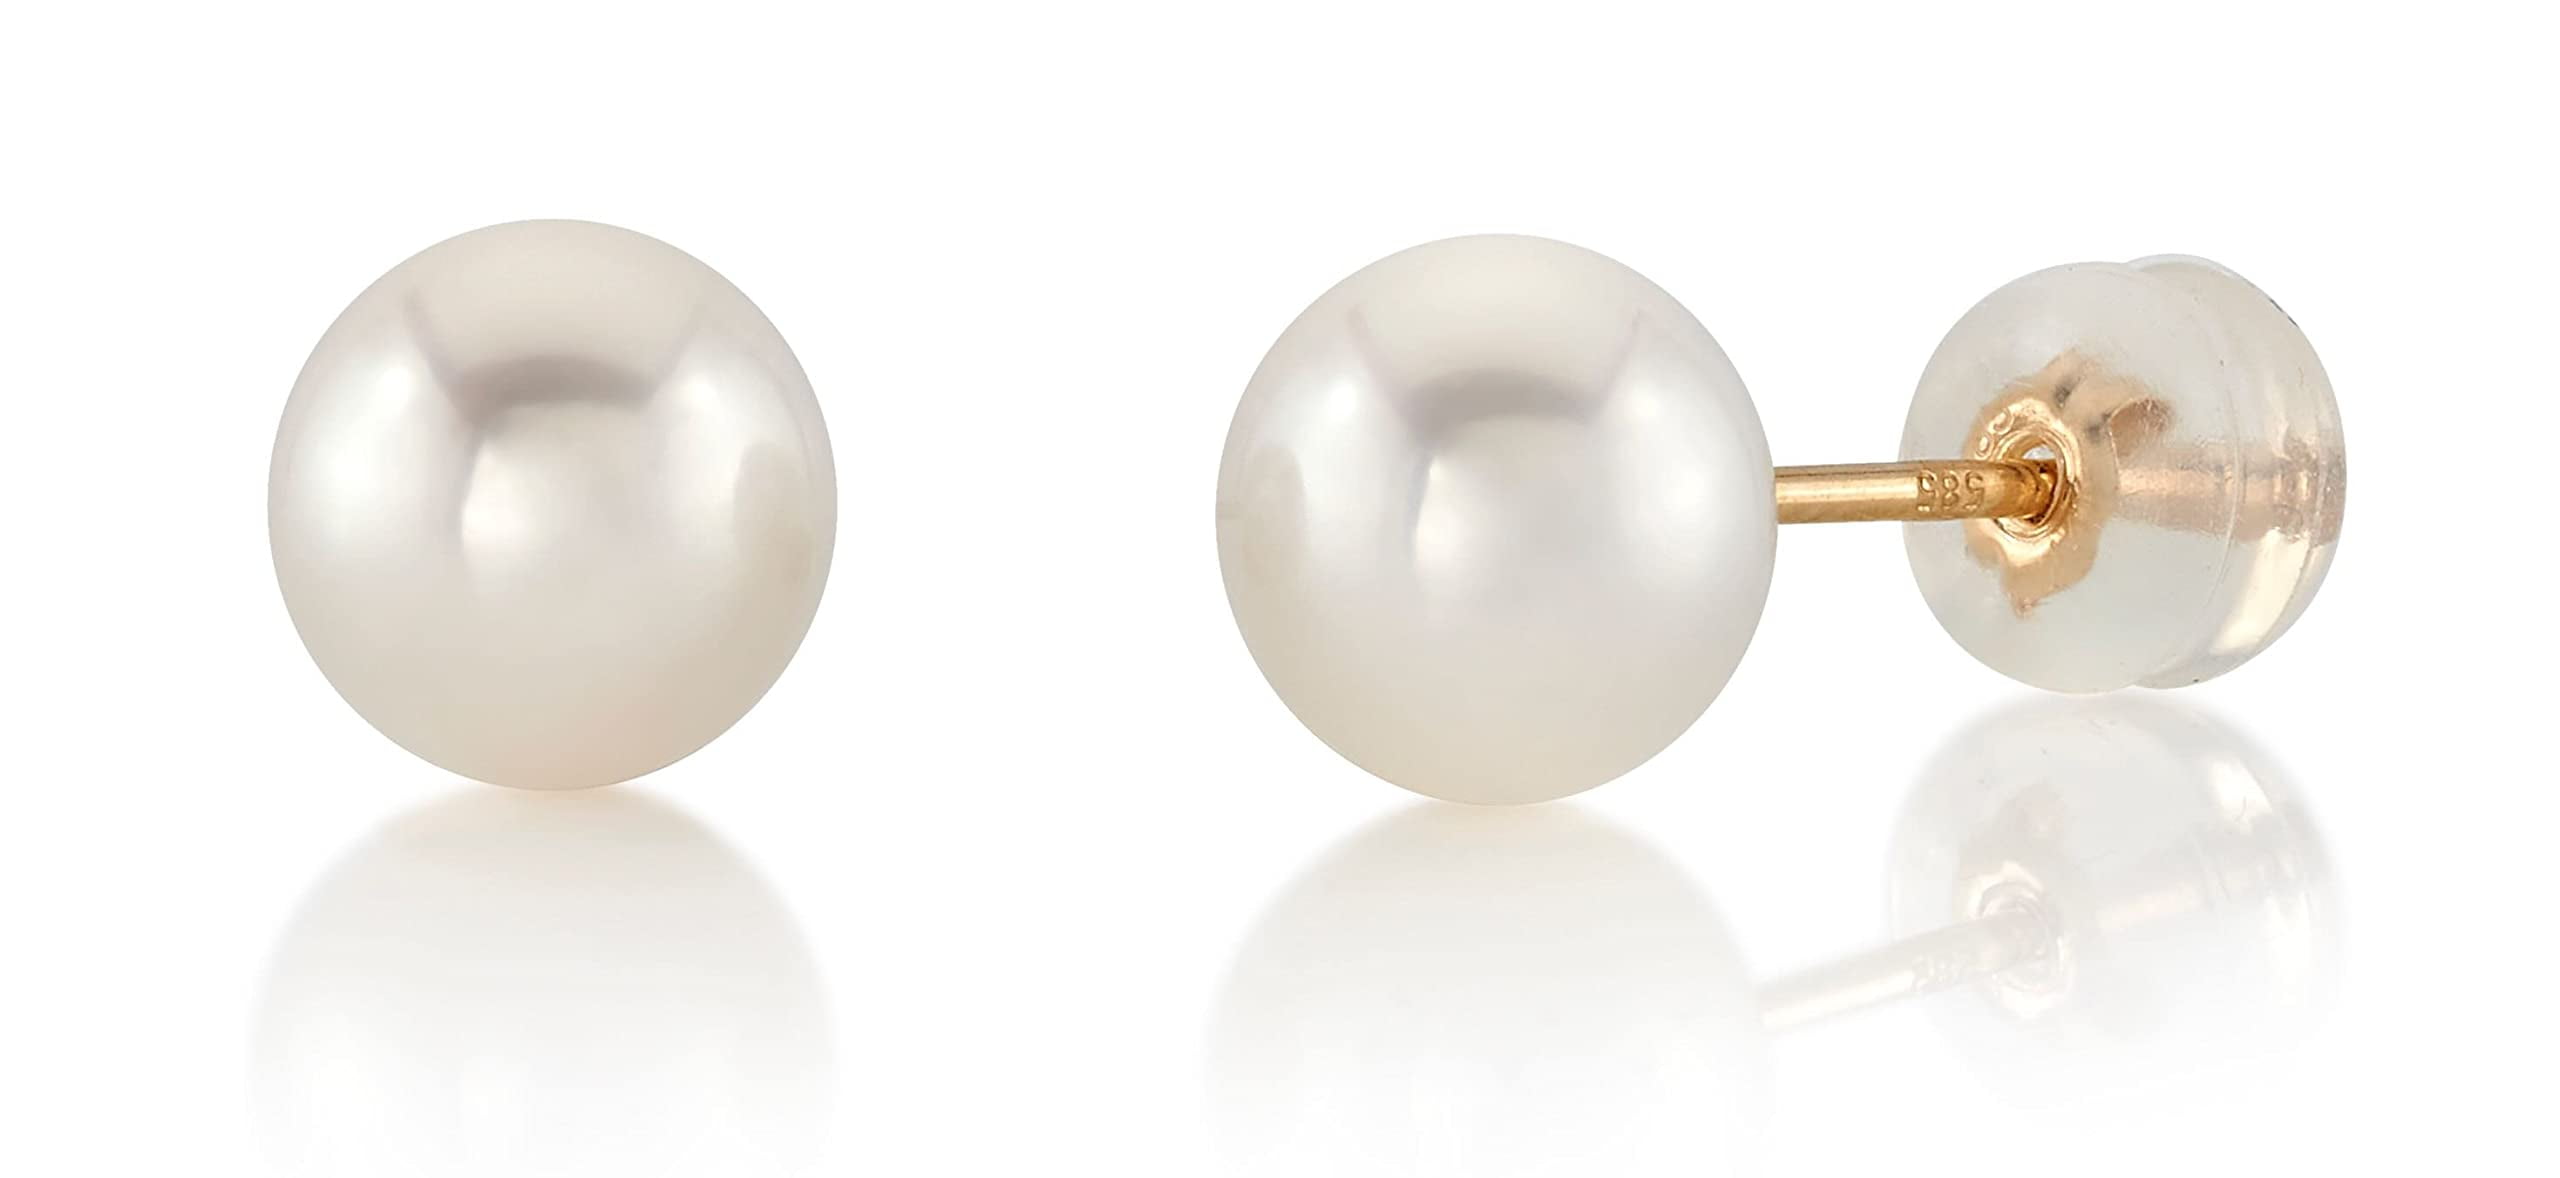 THE PEARL SOURCE Round White Freshwater Real Pearl Earrings for Women ...